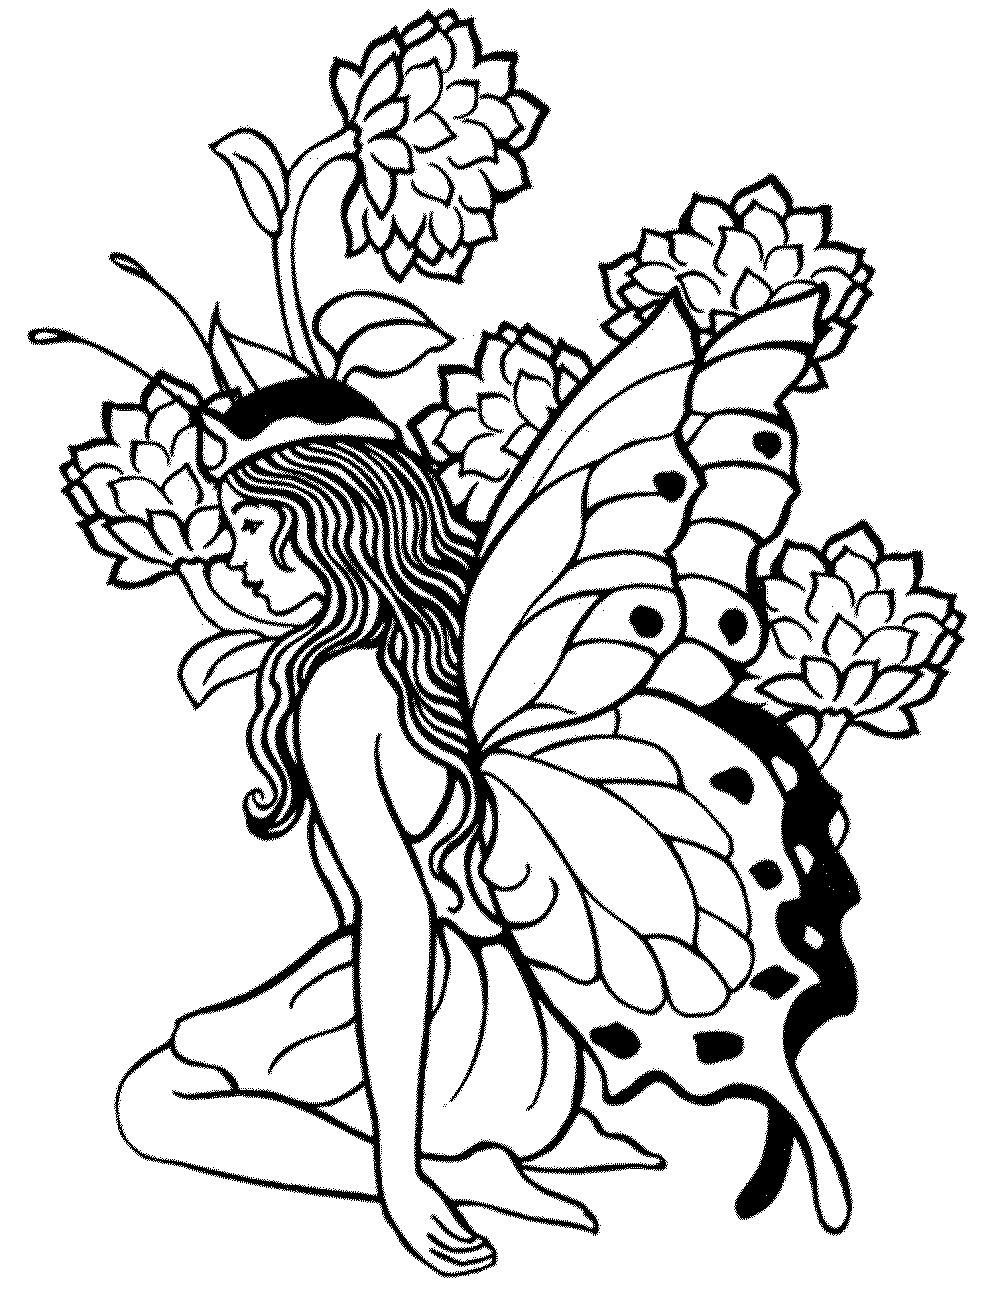 coloring-pages-ideas-fairying-pages-to-print-free-for-adults-dark-free-printable-coloring